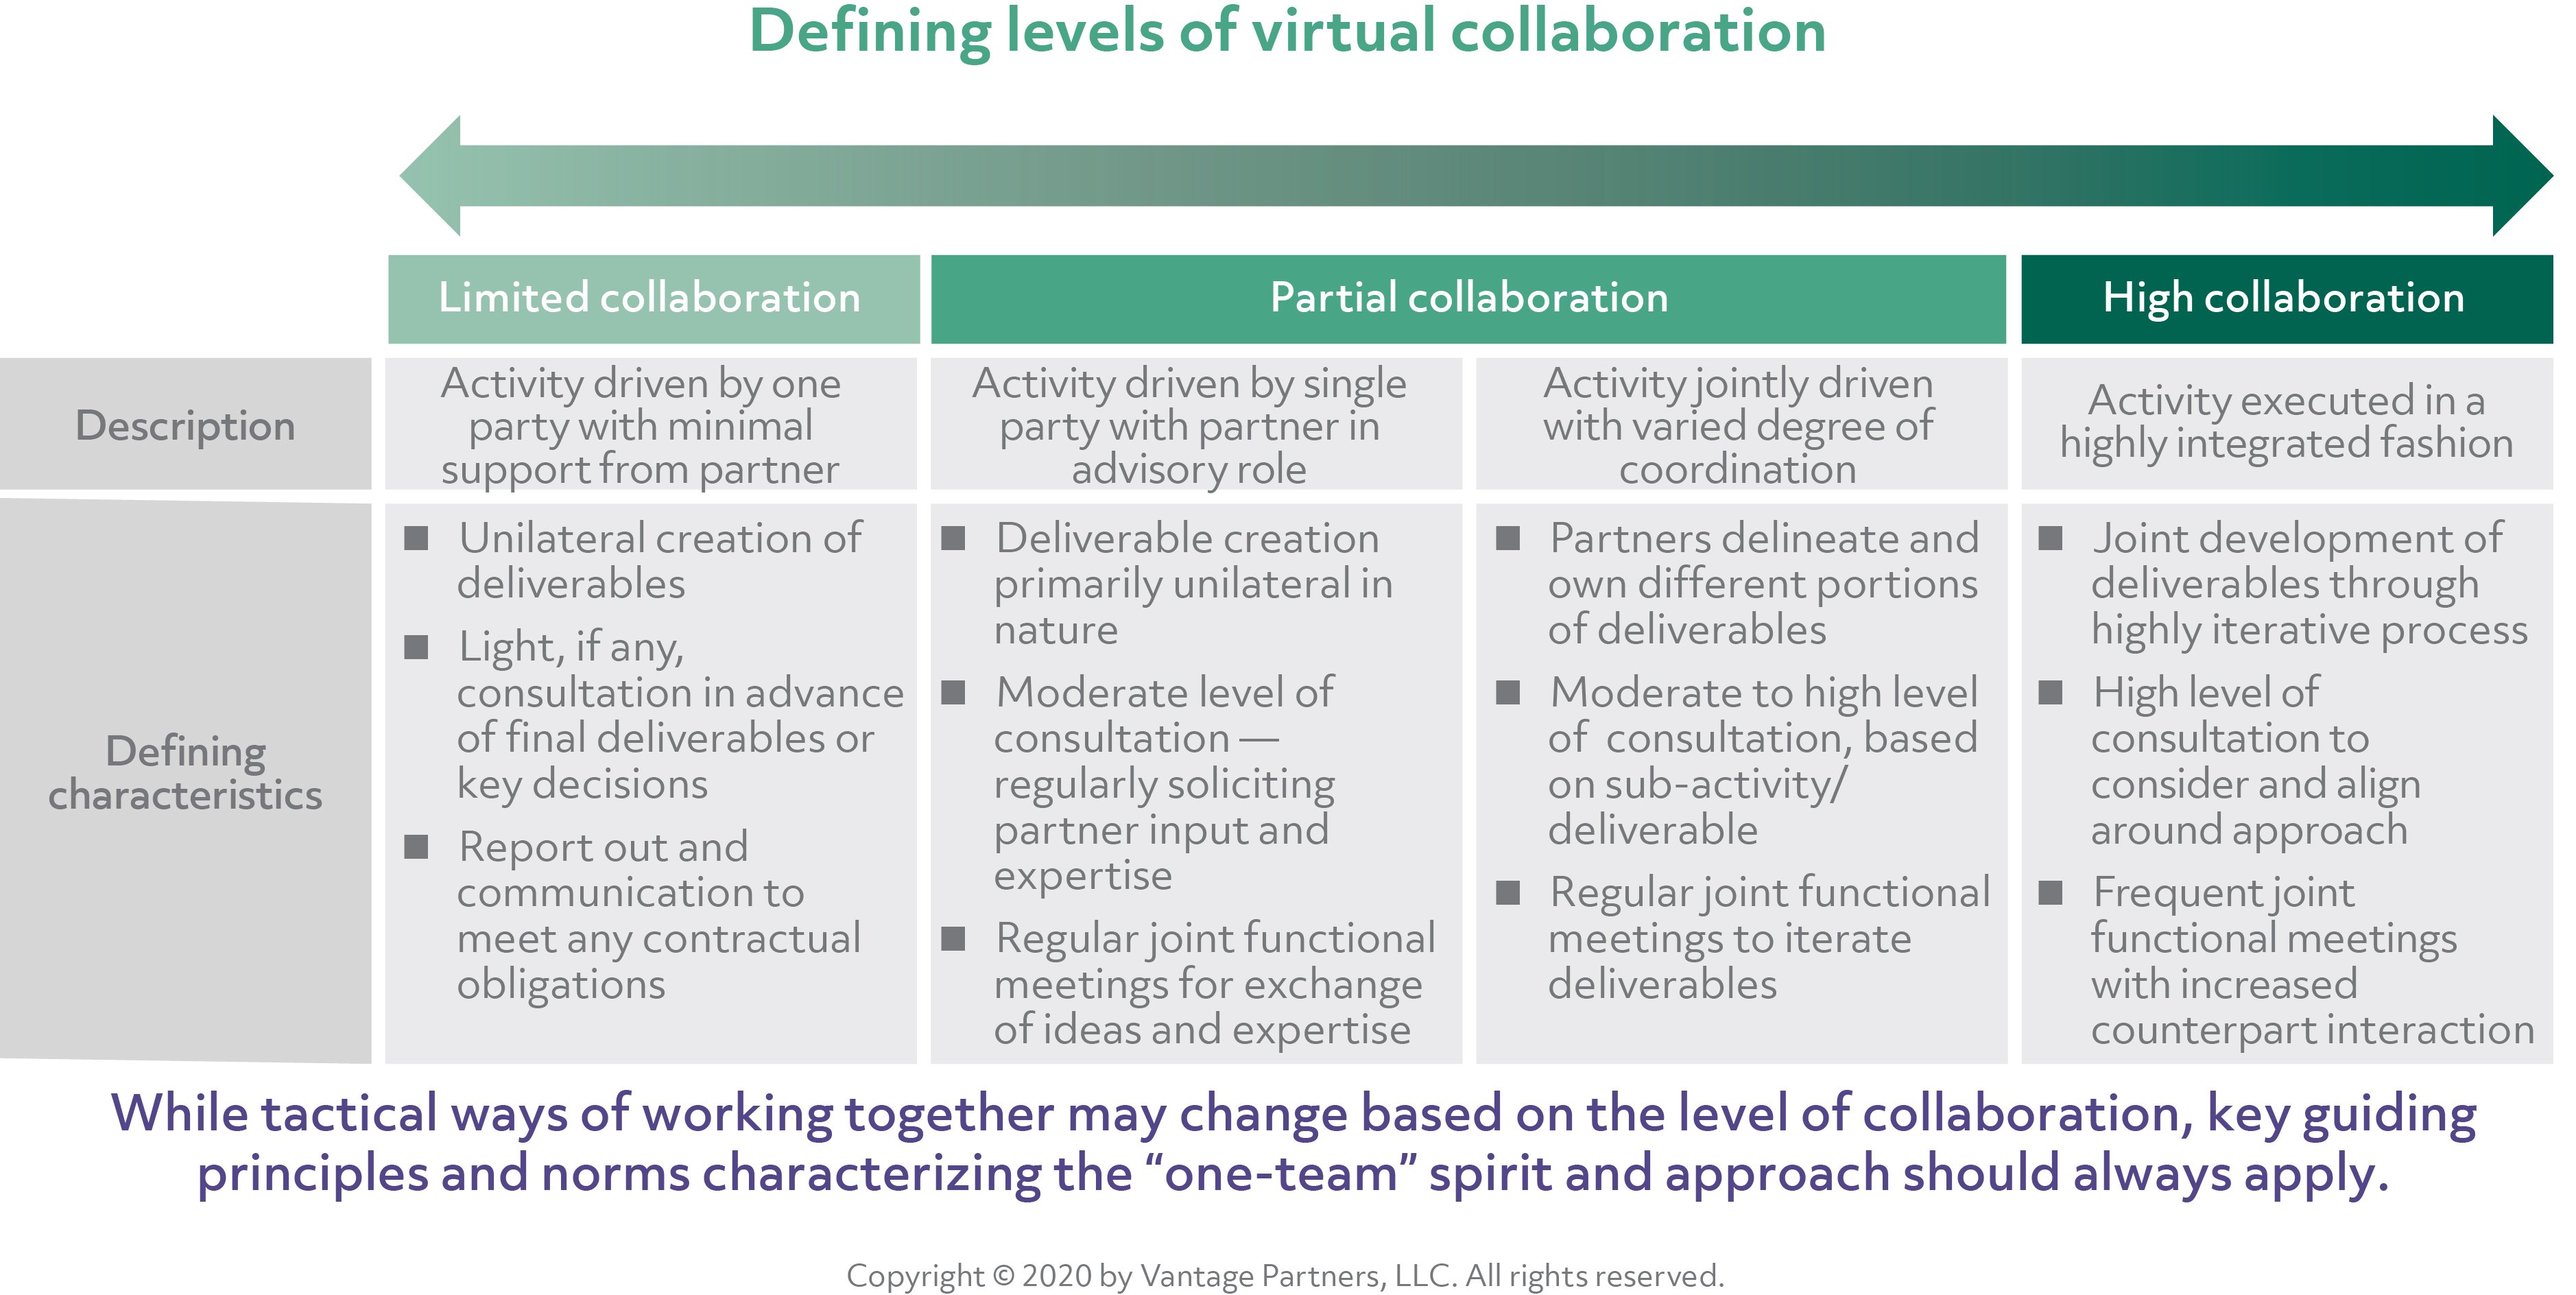 Defining levels of virtual collaboration